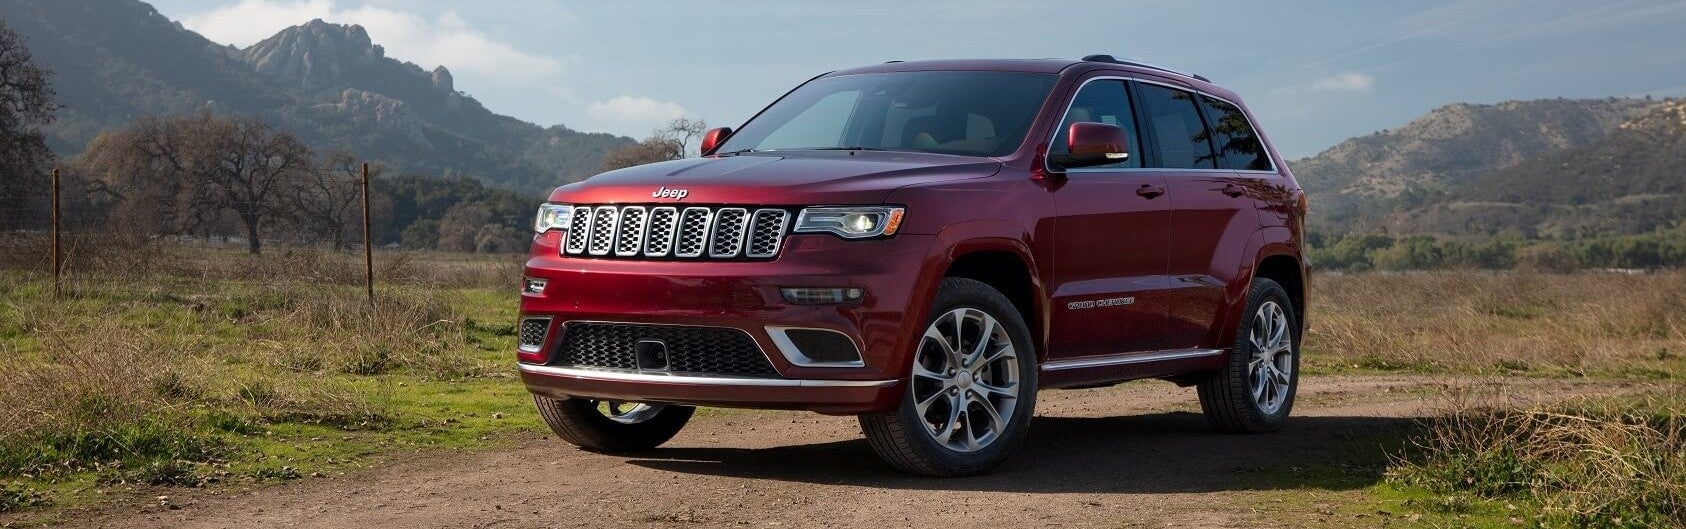 2021 Jeep Grand Cherokee Review Franklin IN